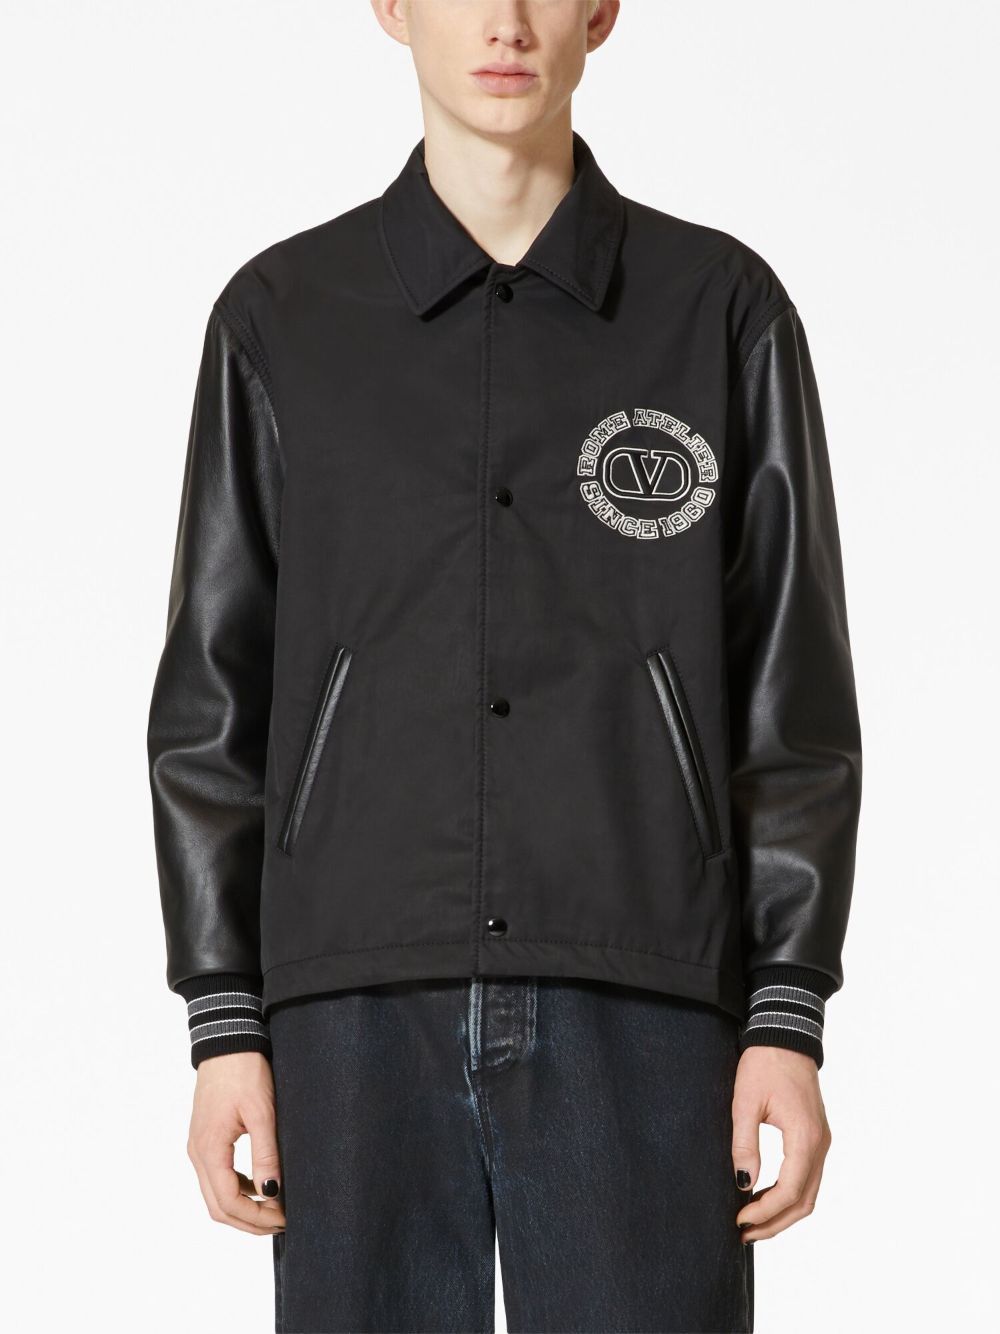 VALENTINO Stylish Black Winter Jacket for Men - FW23 Collection